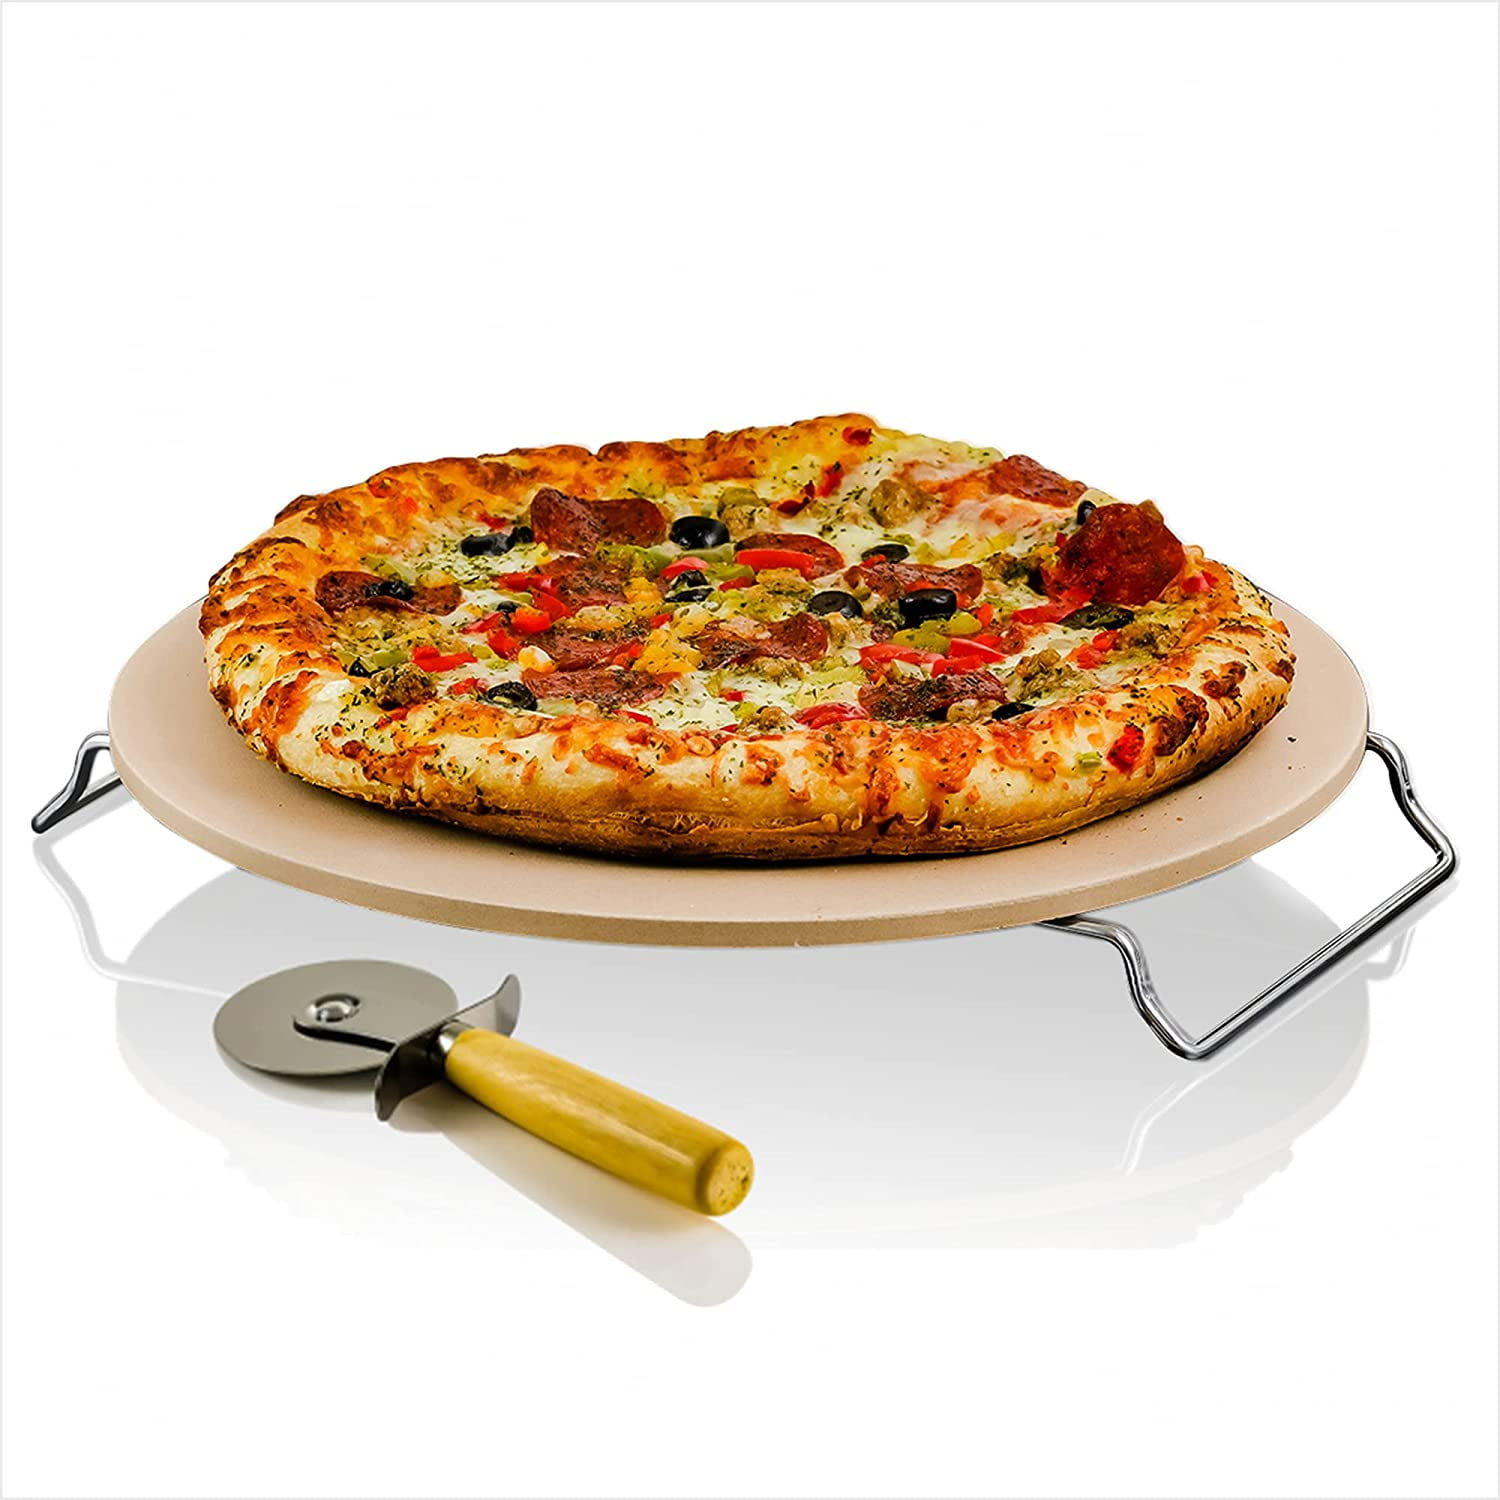 Unicook Pizza Stone Bread Cookies and More Durable and Safe Thermal Shock Resistant Large Grilling Pizza Plate 38cm Round Baking Stone for Pizza Heavy Duty Cordierite Stone for Oven and BBQ